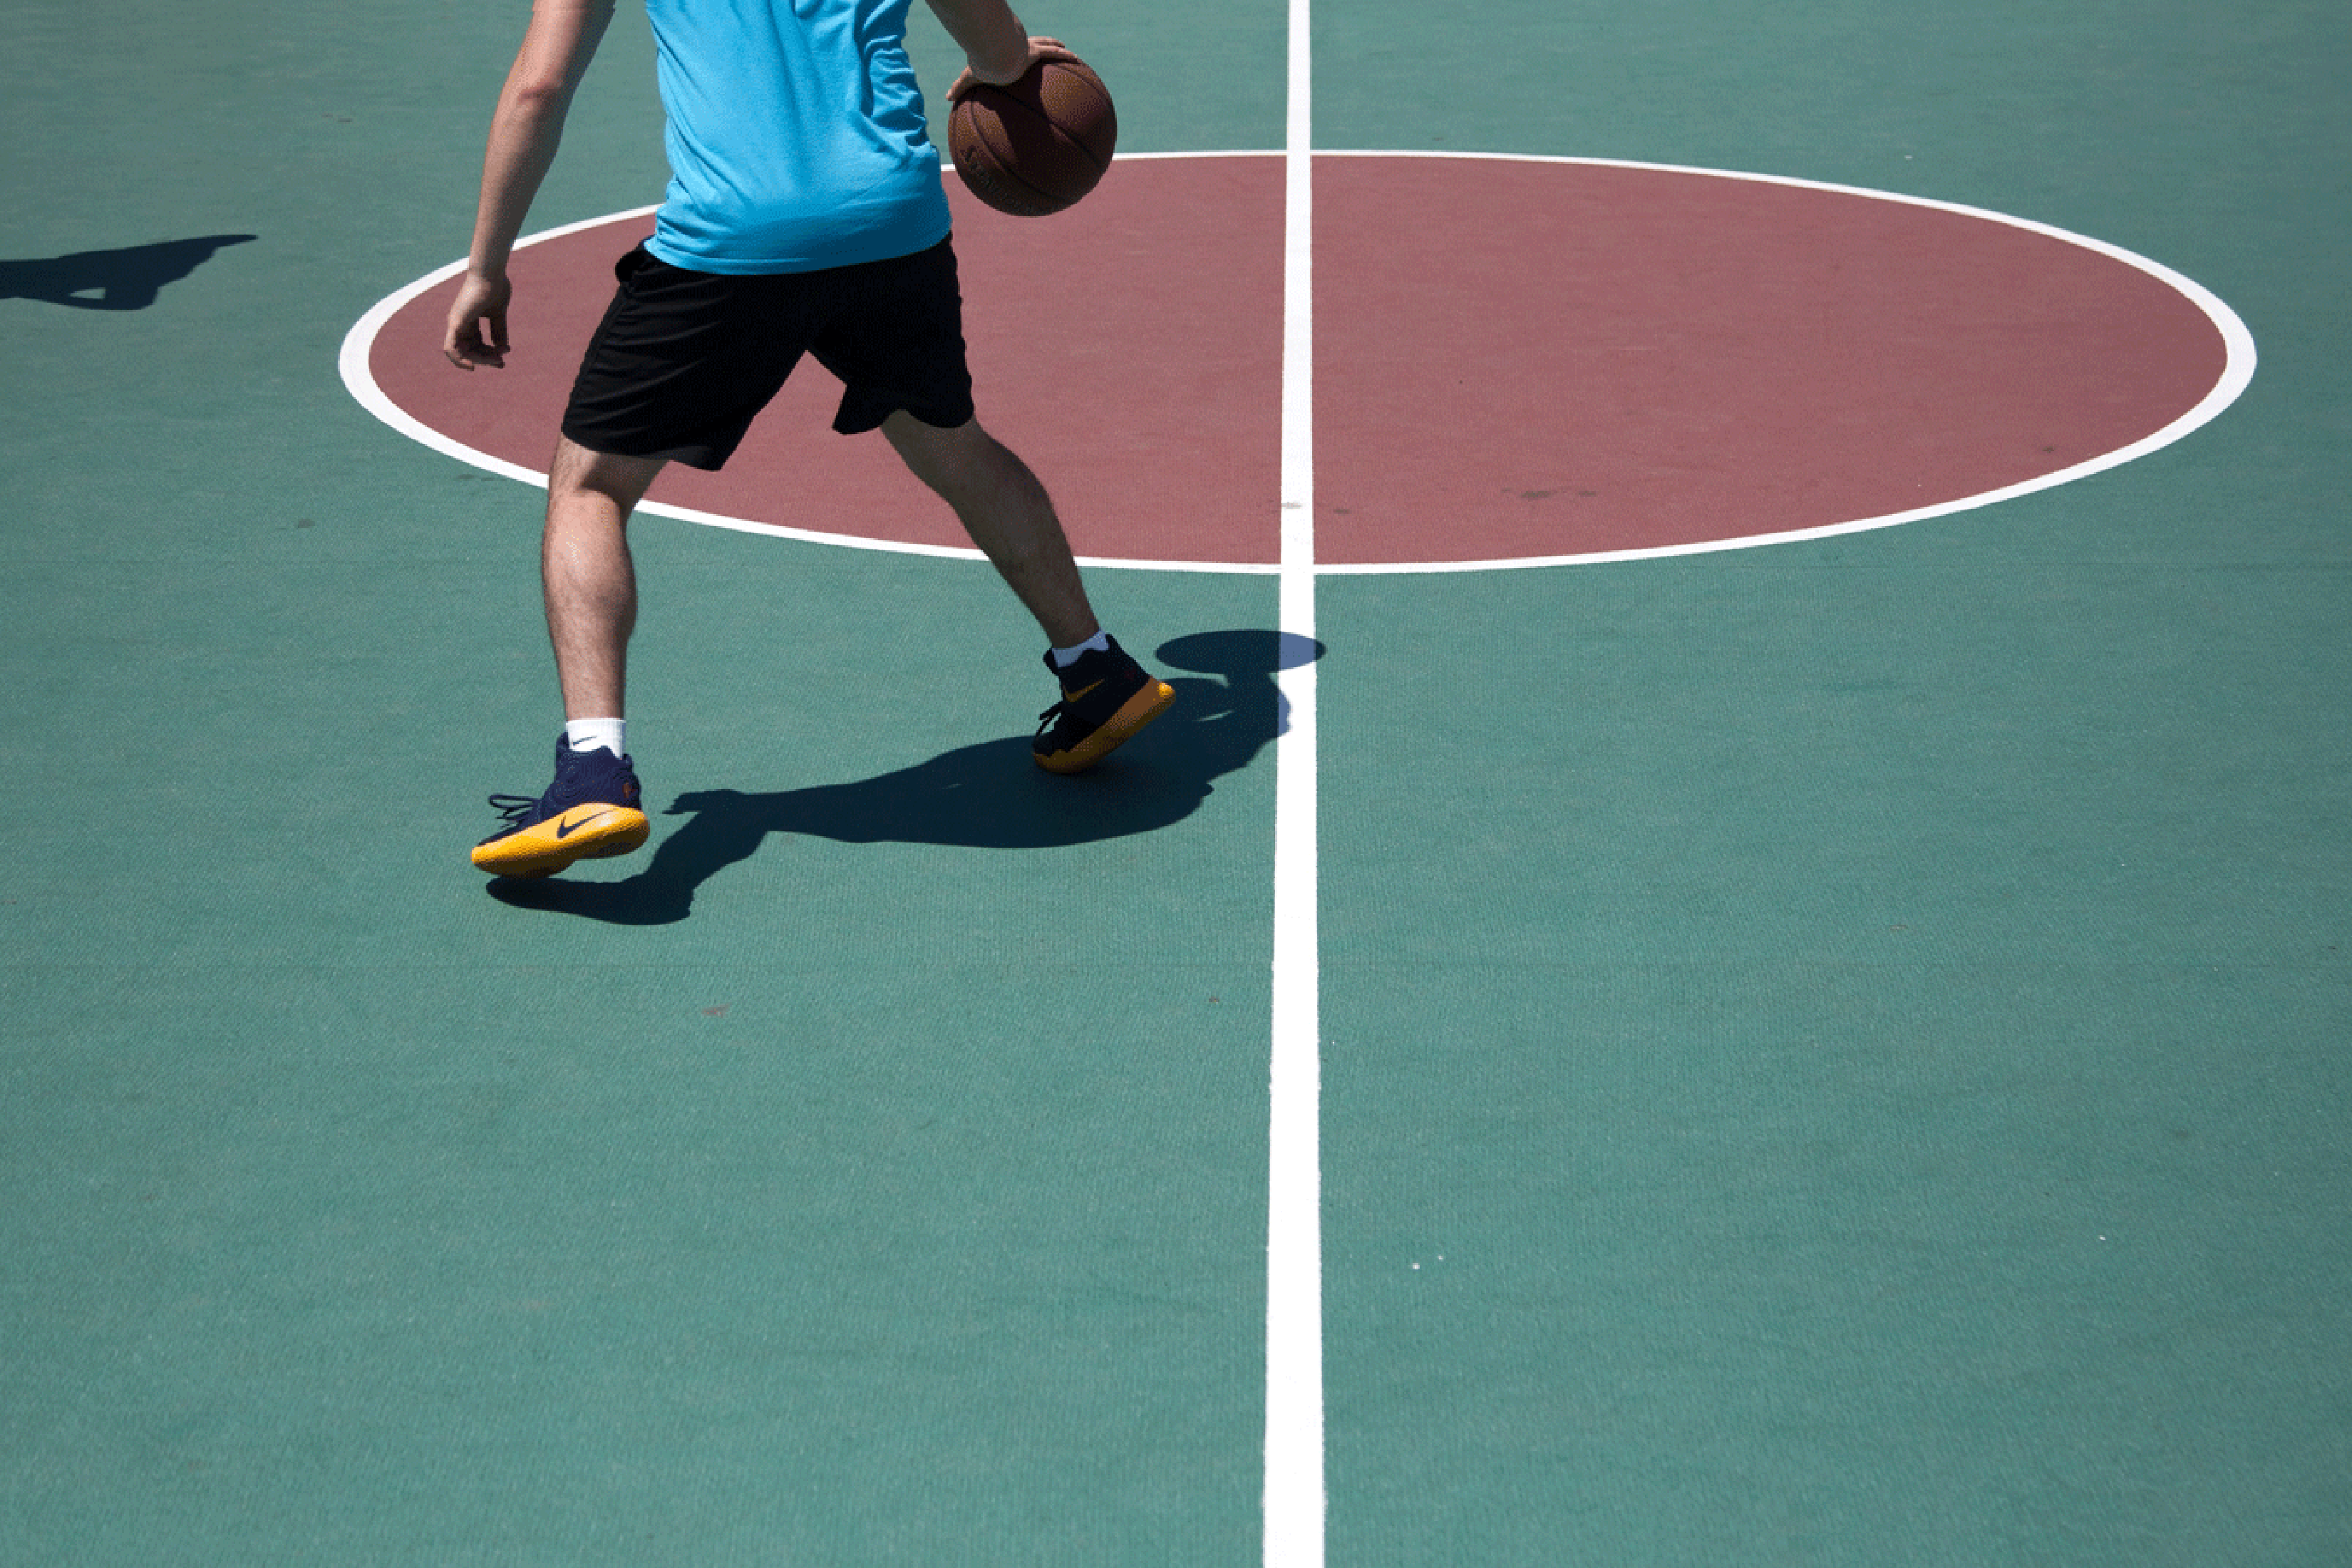 A basketball player is shown from the midriff down on a green court with a red circle.